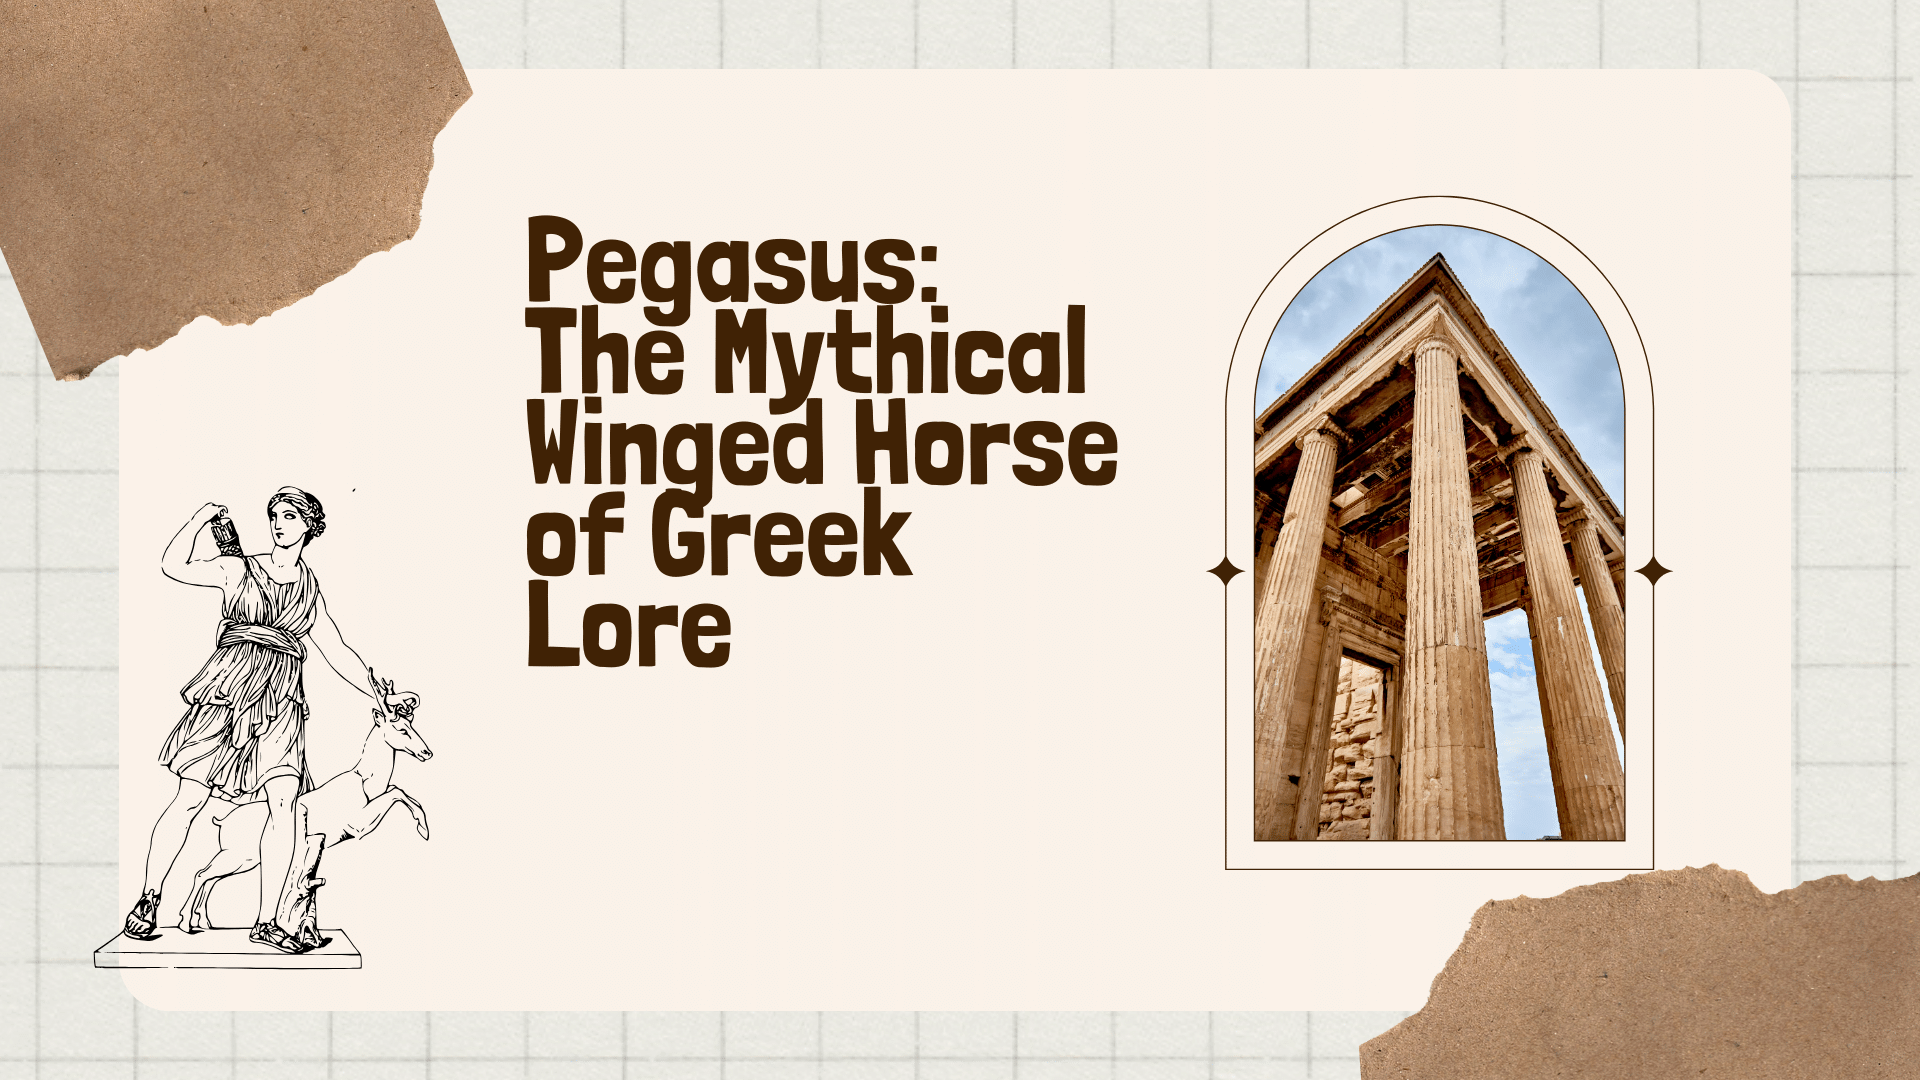 Pegasus: The Mythical Winged Horse of Greek Lore